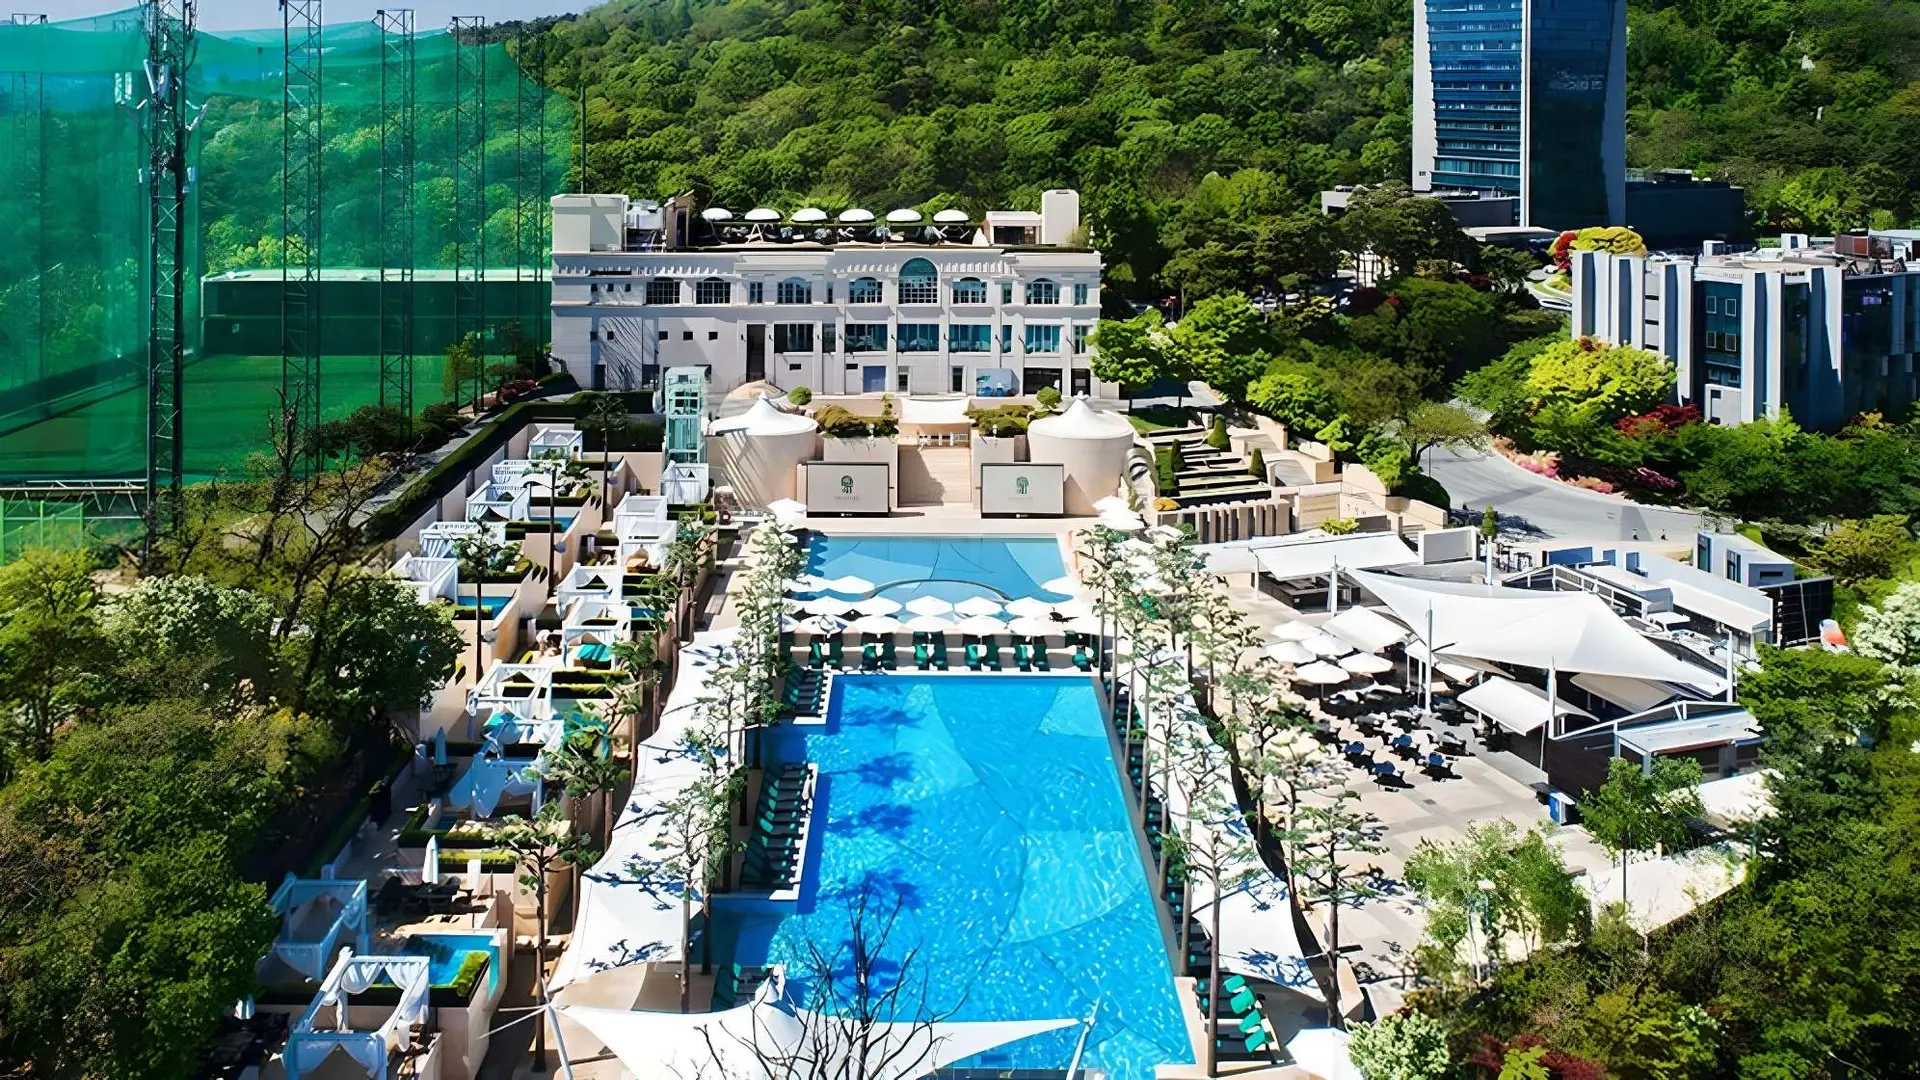 Outdoor pool area and resturant at banyan tree club & spa seoul